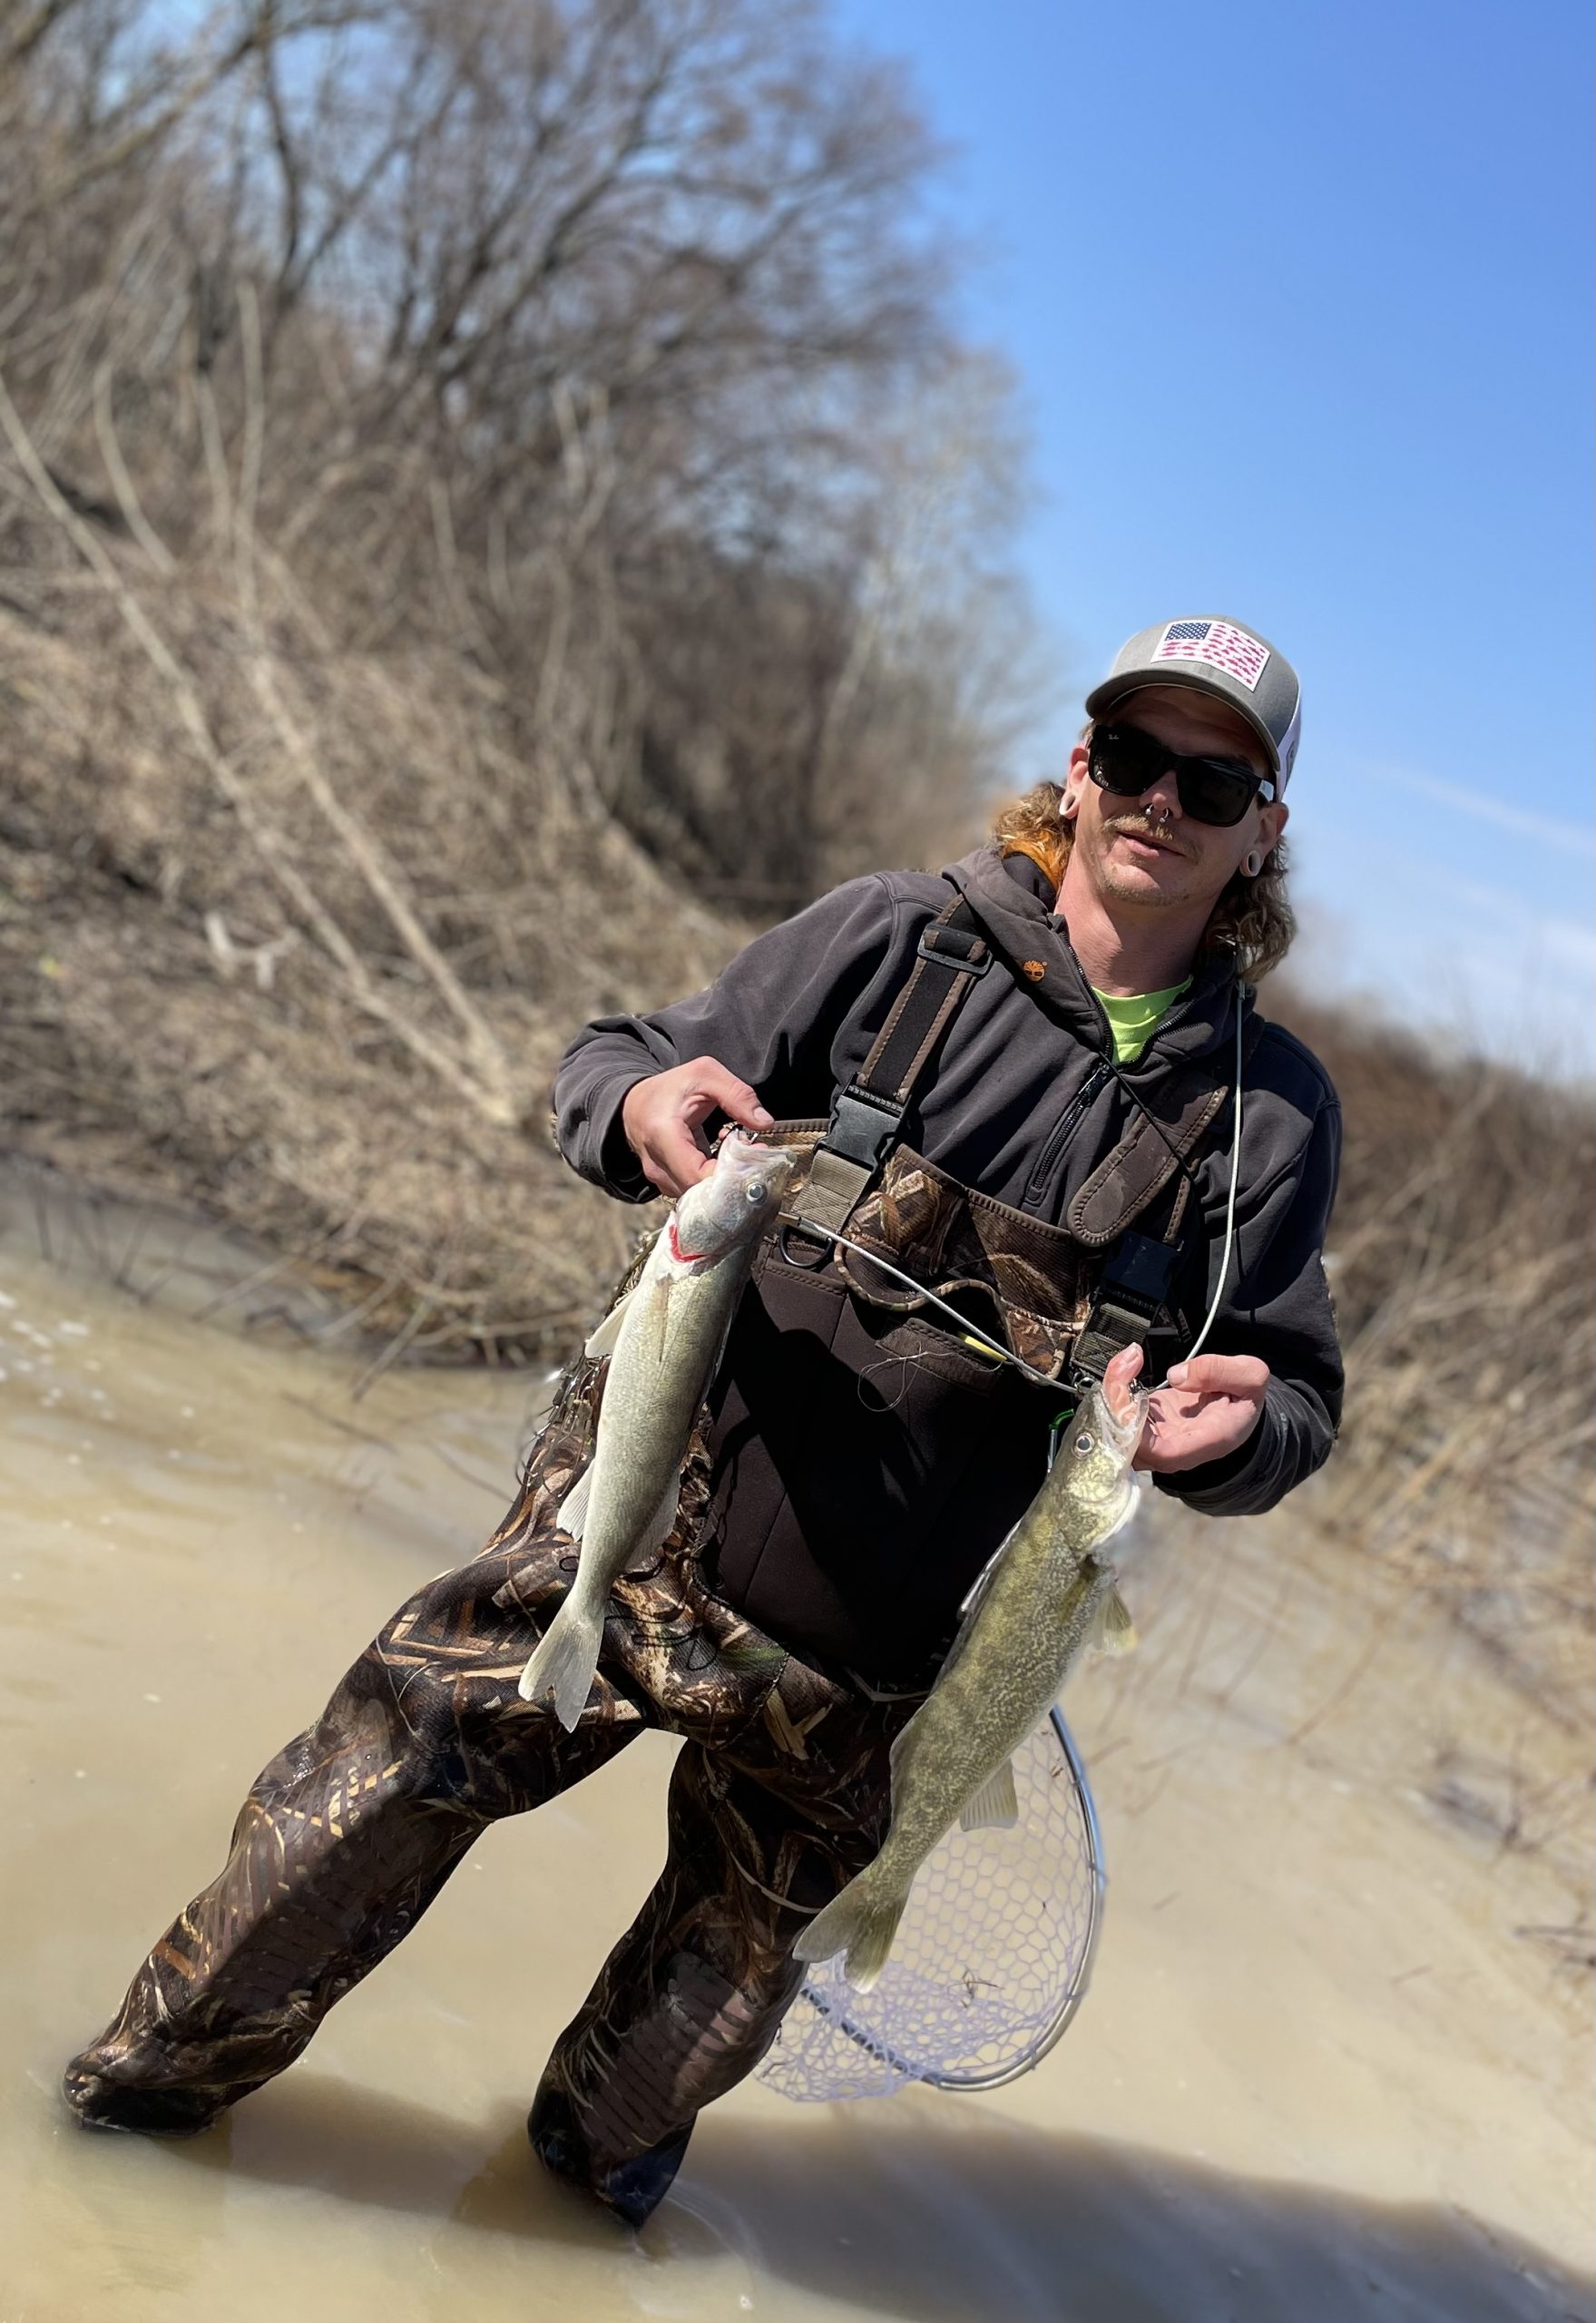 Maumee river report 23 march 22